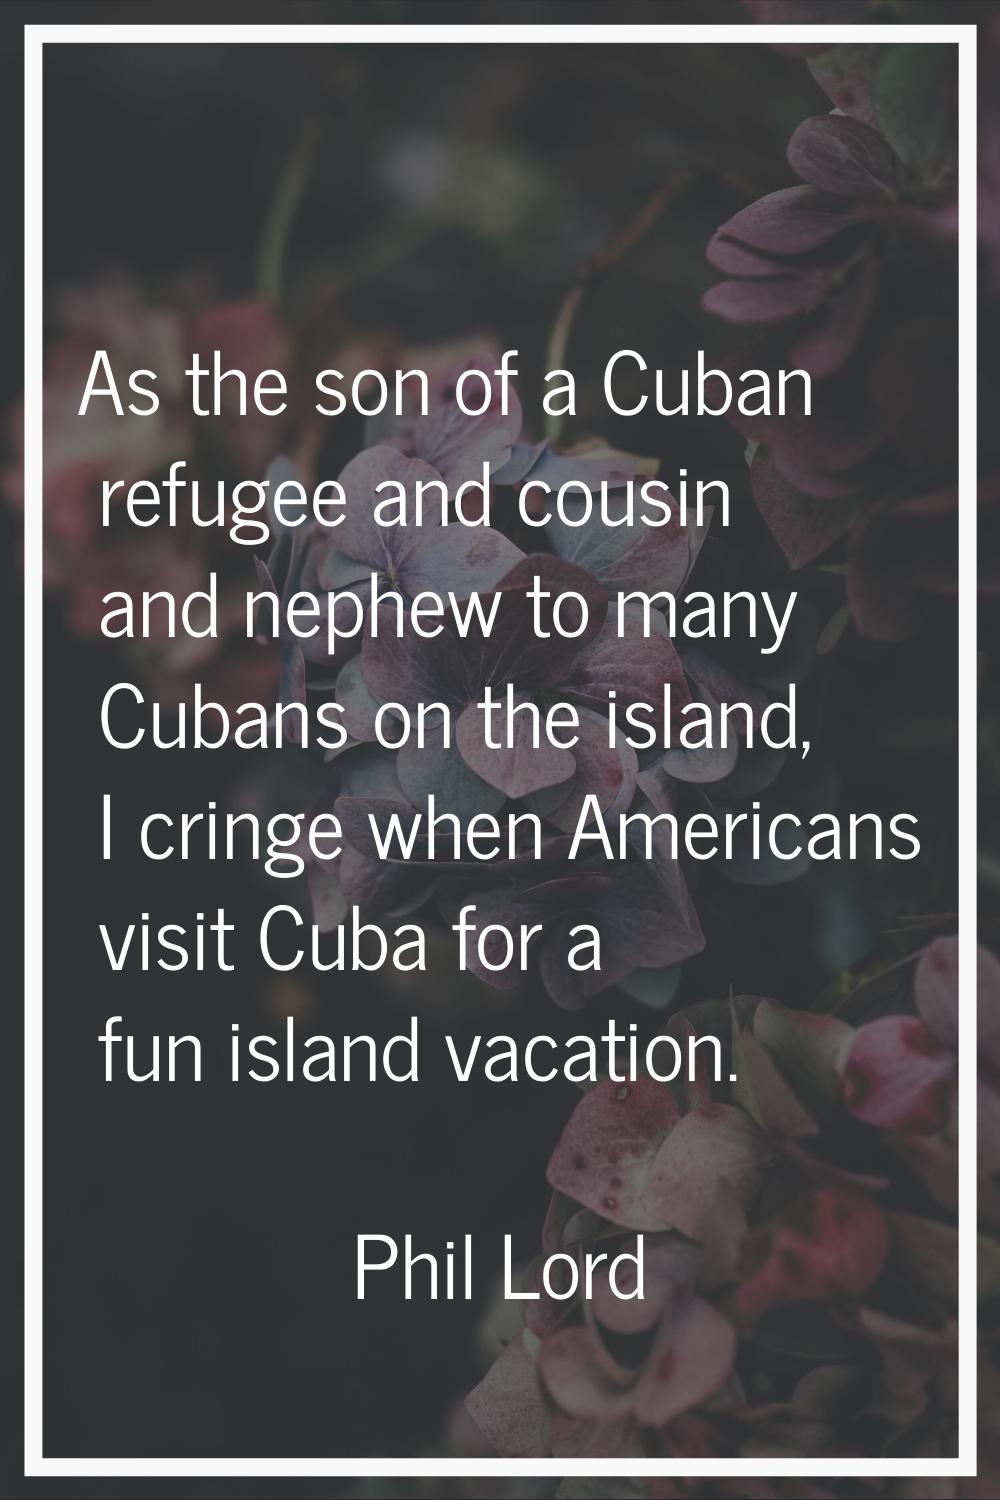 As the son of a Cuban refugee and cousin and nephew to many Cubans on the island, I cringe when Ame